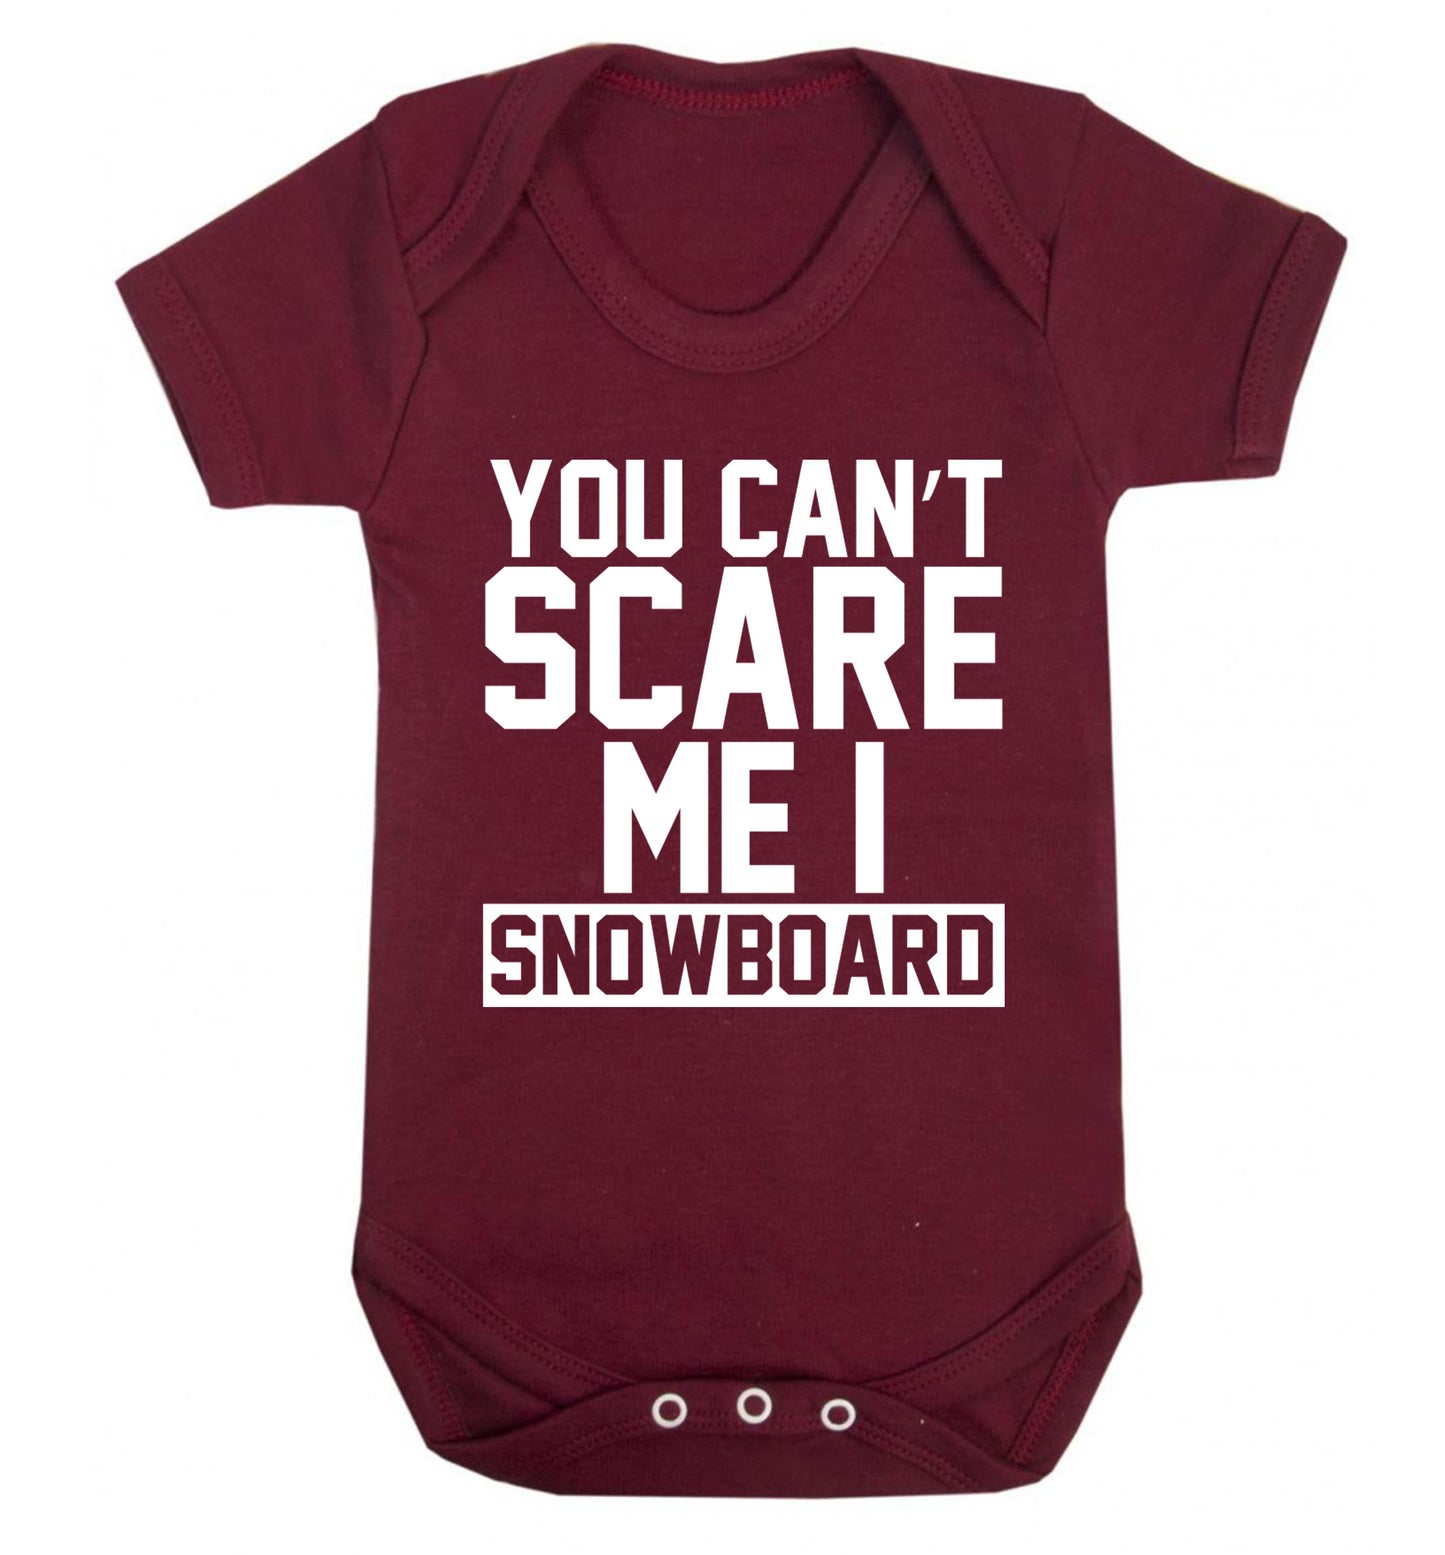 You can't scare me I snowboard Baby Vest maroon 18-24 months